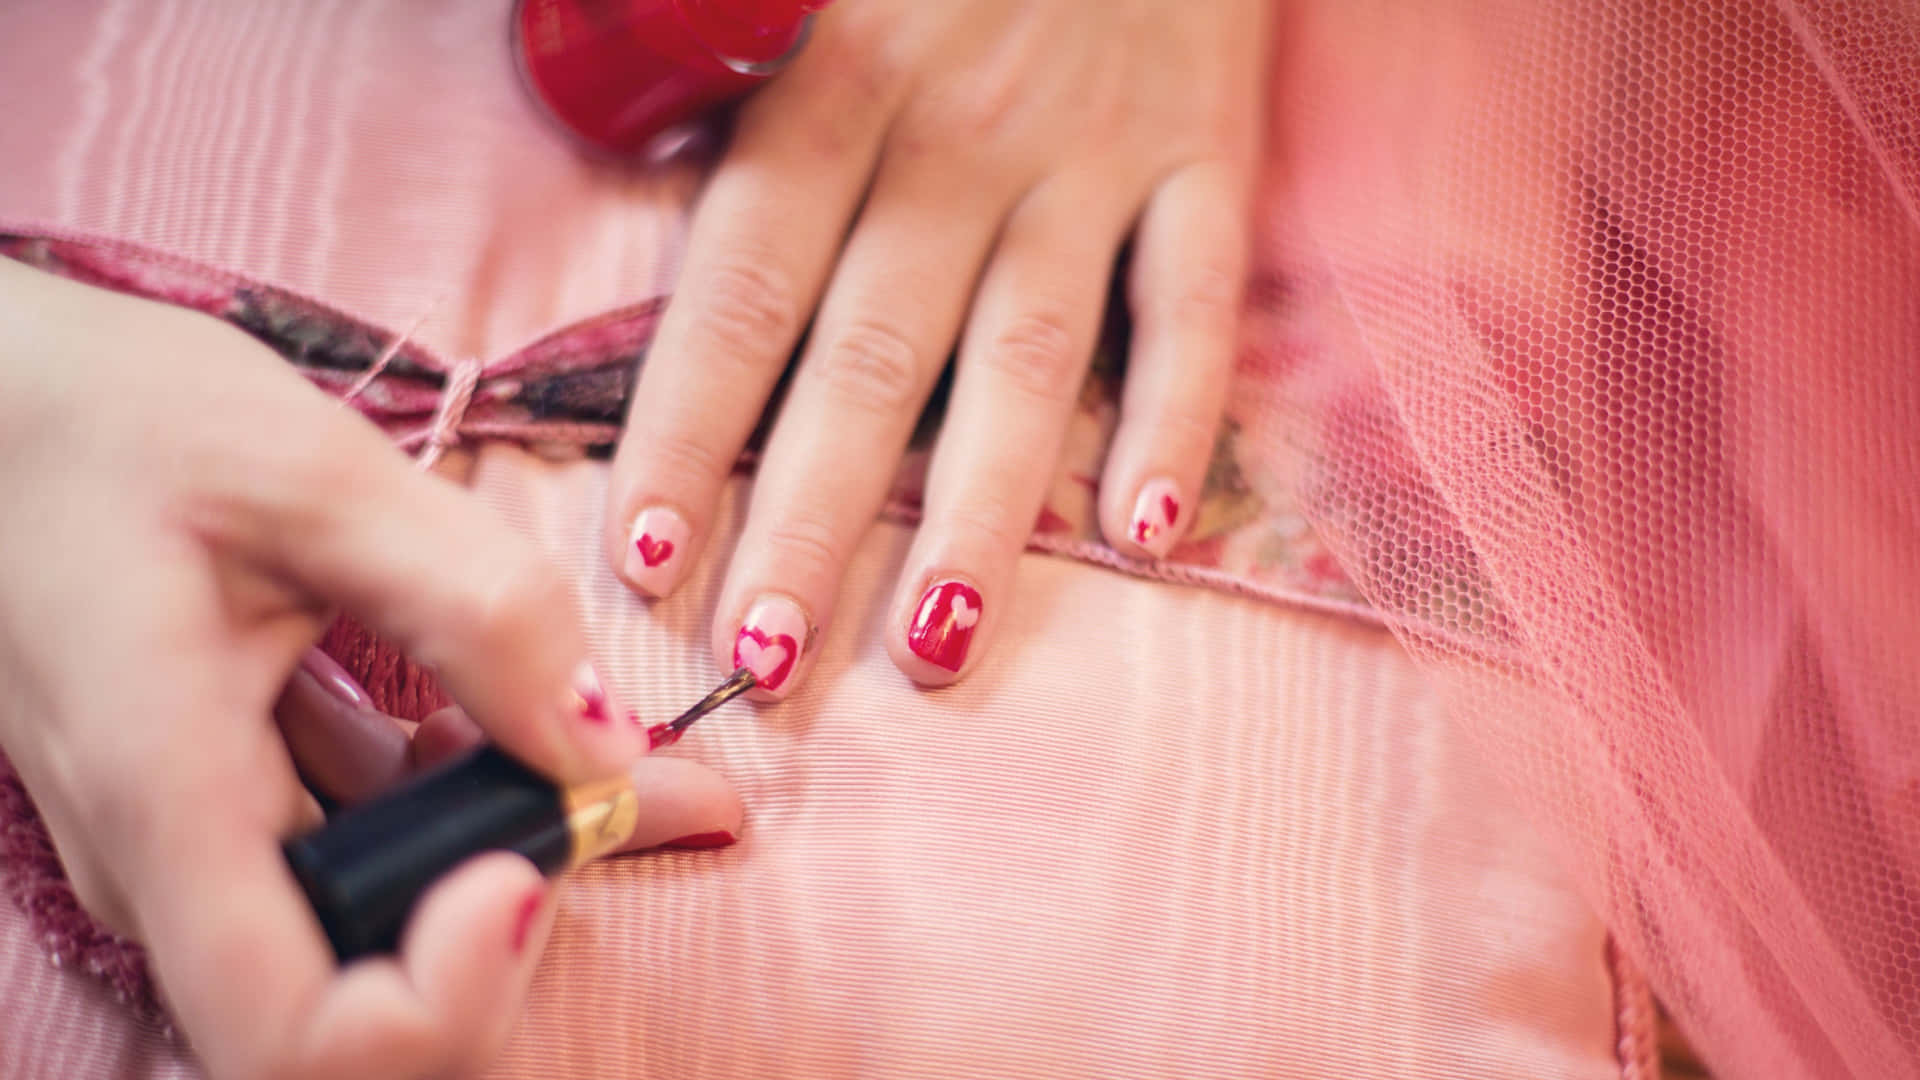 A Woman Is Painting Her Nails With A Pink Nail Polish